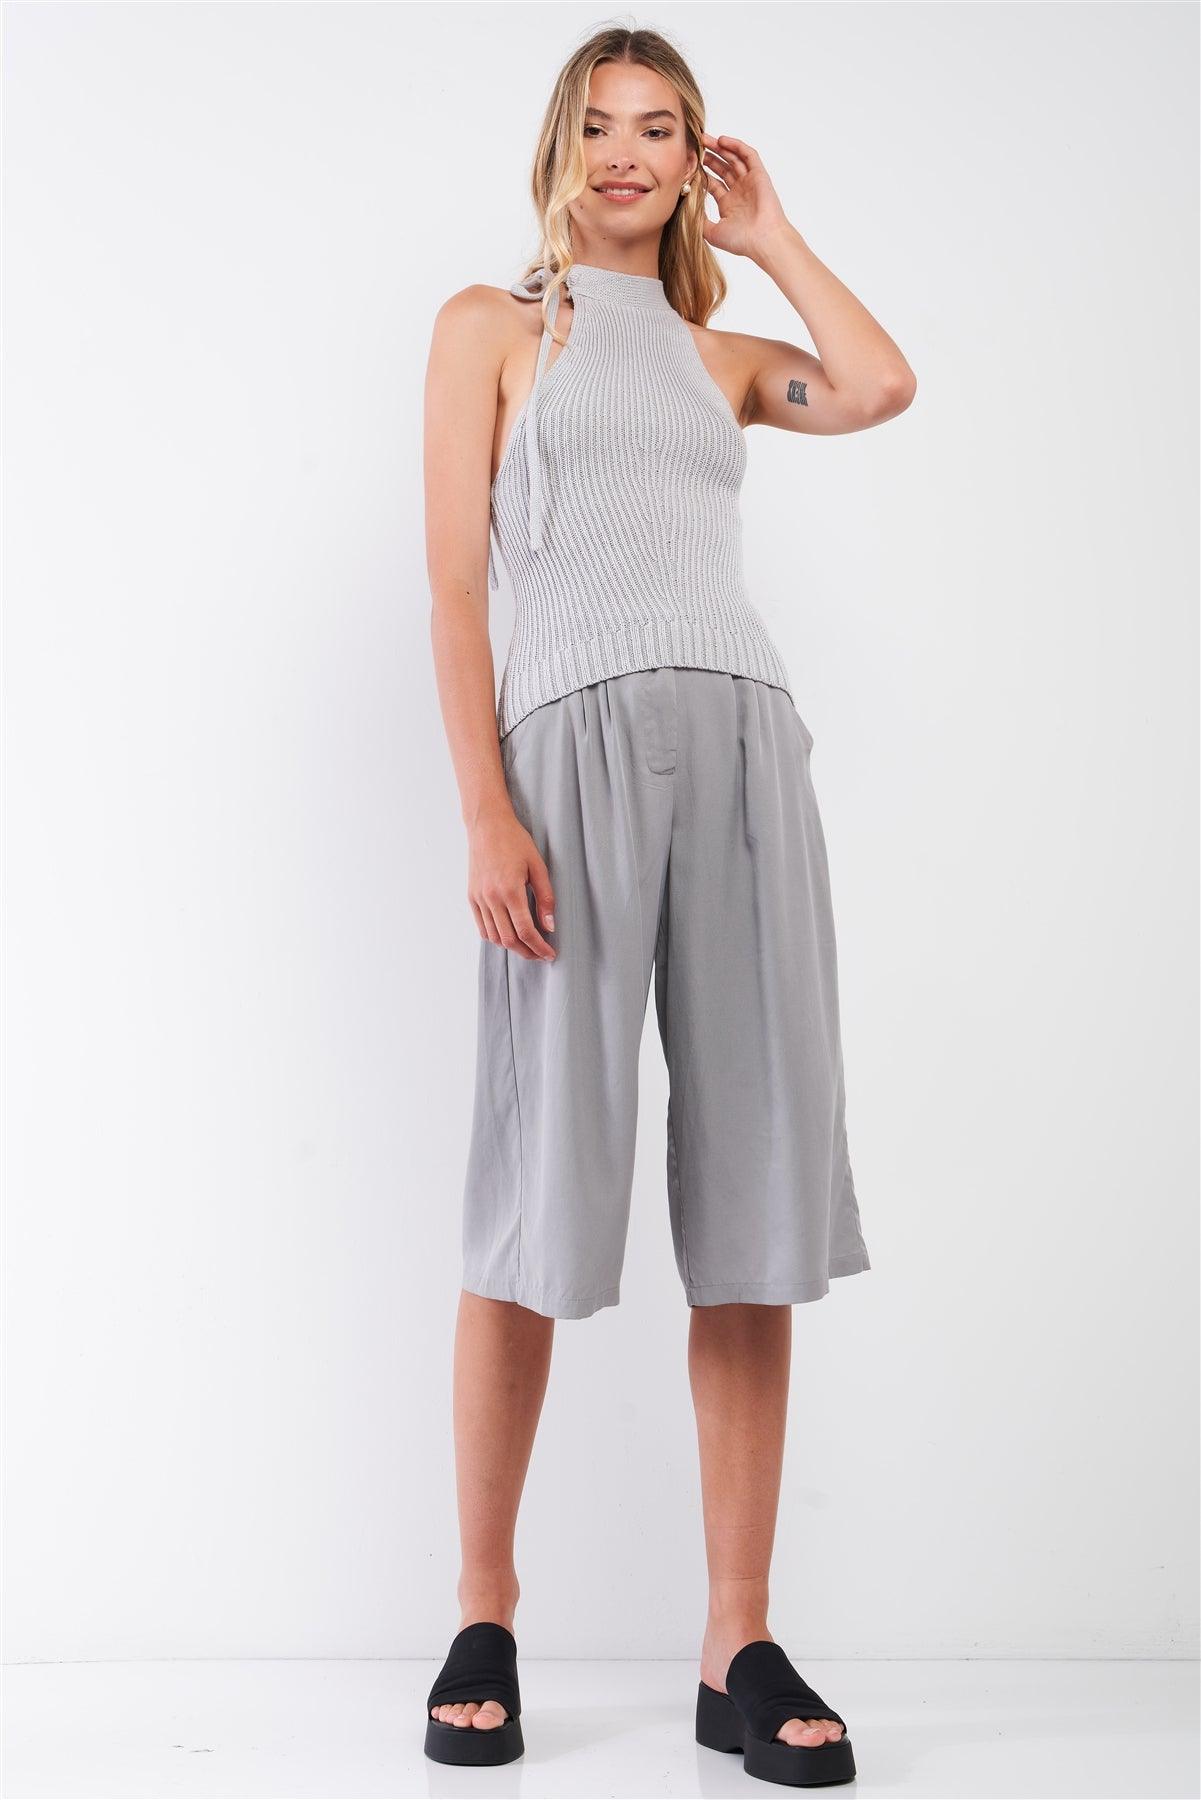 Silver Grey High Neck With Self-Tie Detail On The Side Sleeveless Ribbed Knit Top /3-2-1